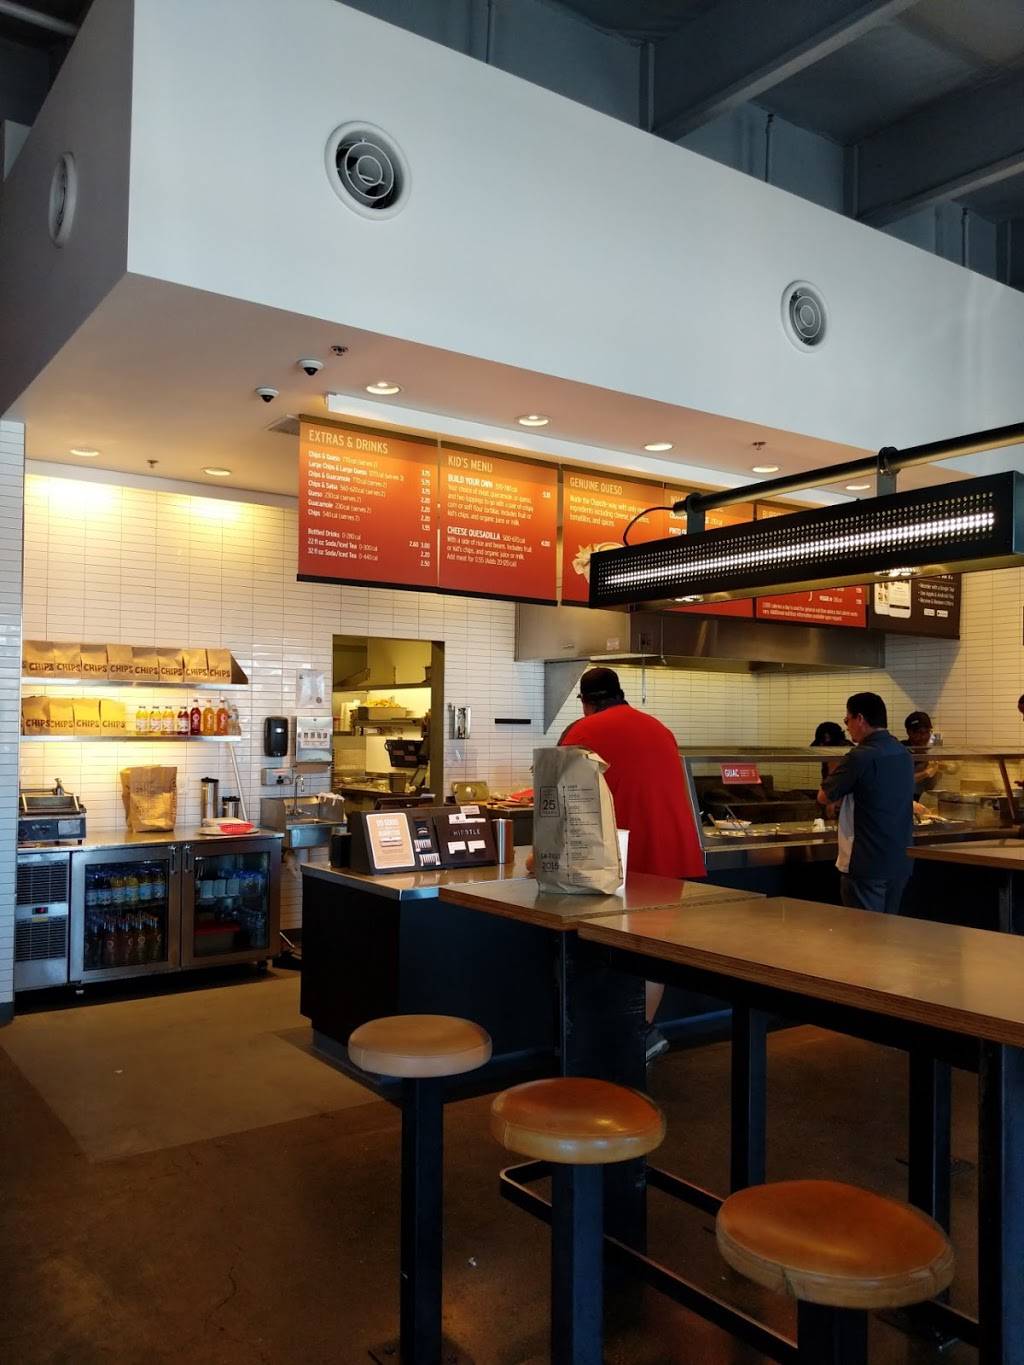 Chipotle Mexican Grill | restaurant | 8460 Edgewater Dr Ste C, Oakland, CA 94621, USA | 5106868000 OR +1 510-686-8000